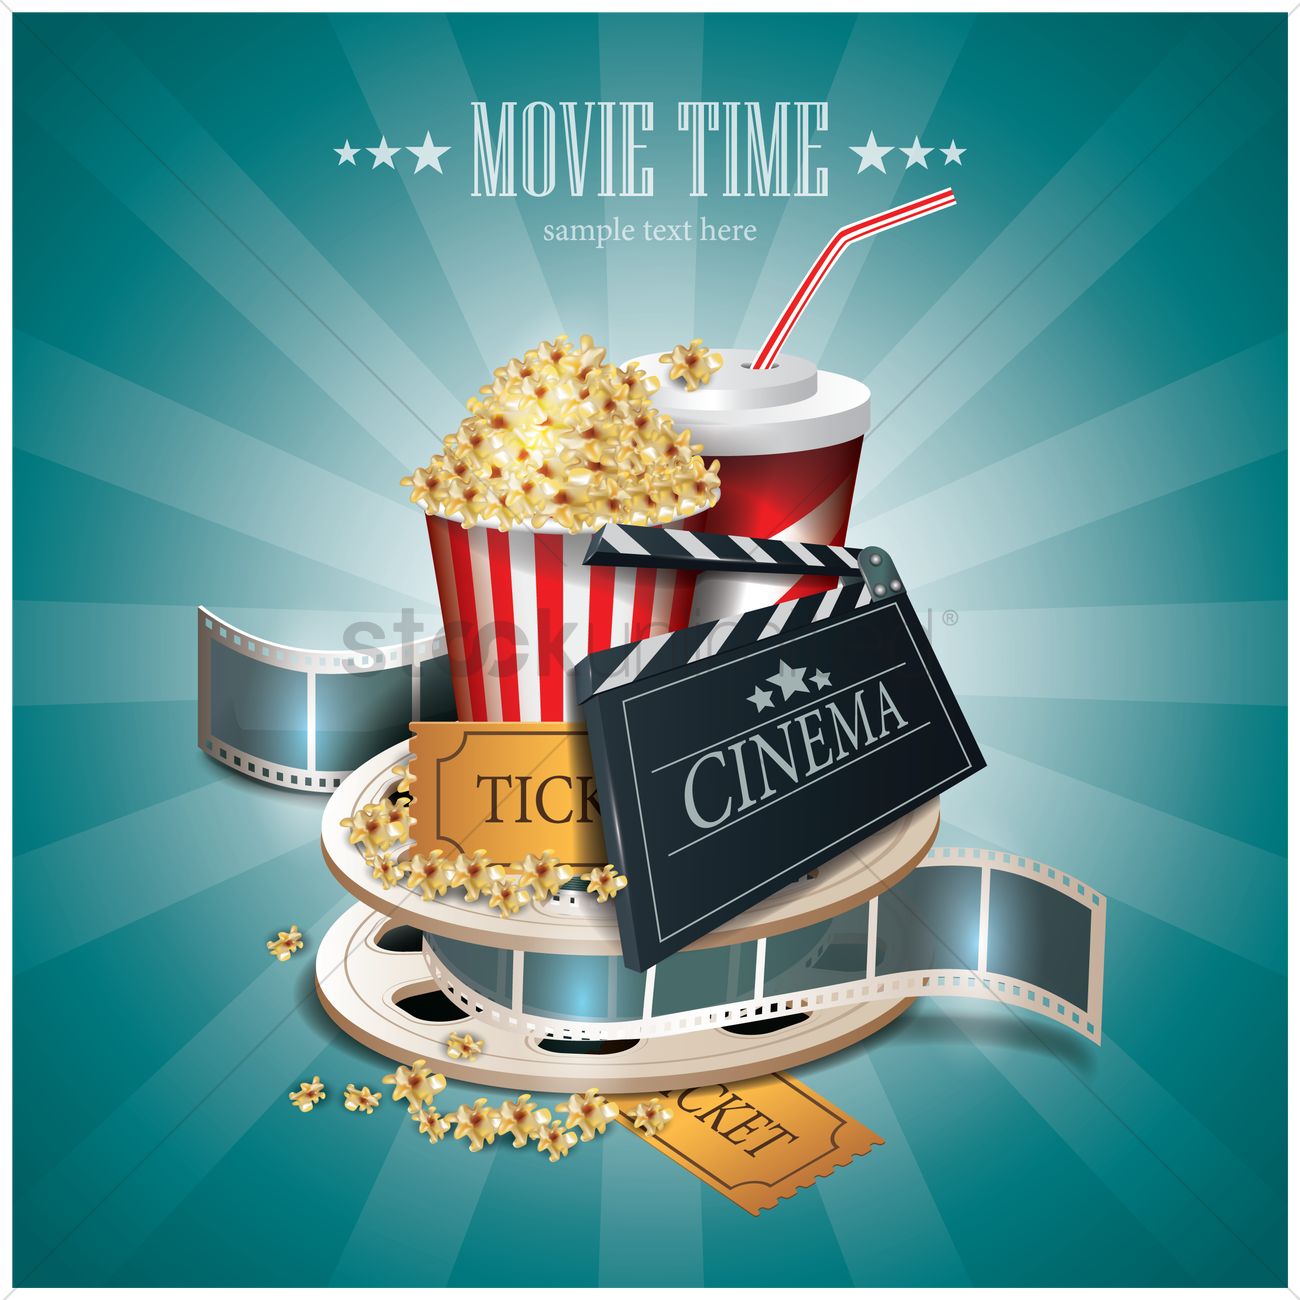 Movie time wallpaper Vector Image   1804982 StockUnlimited 1300x1300